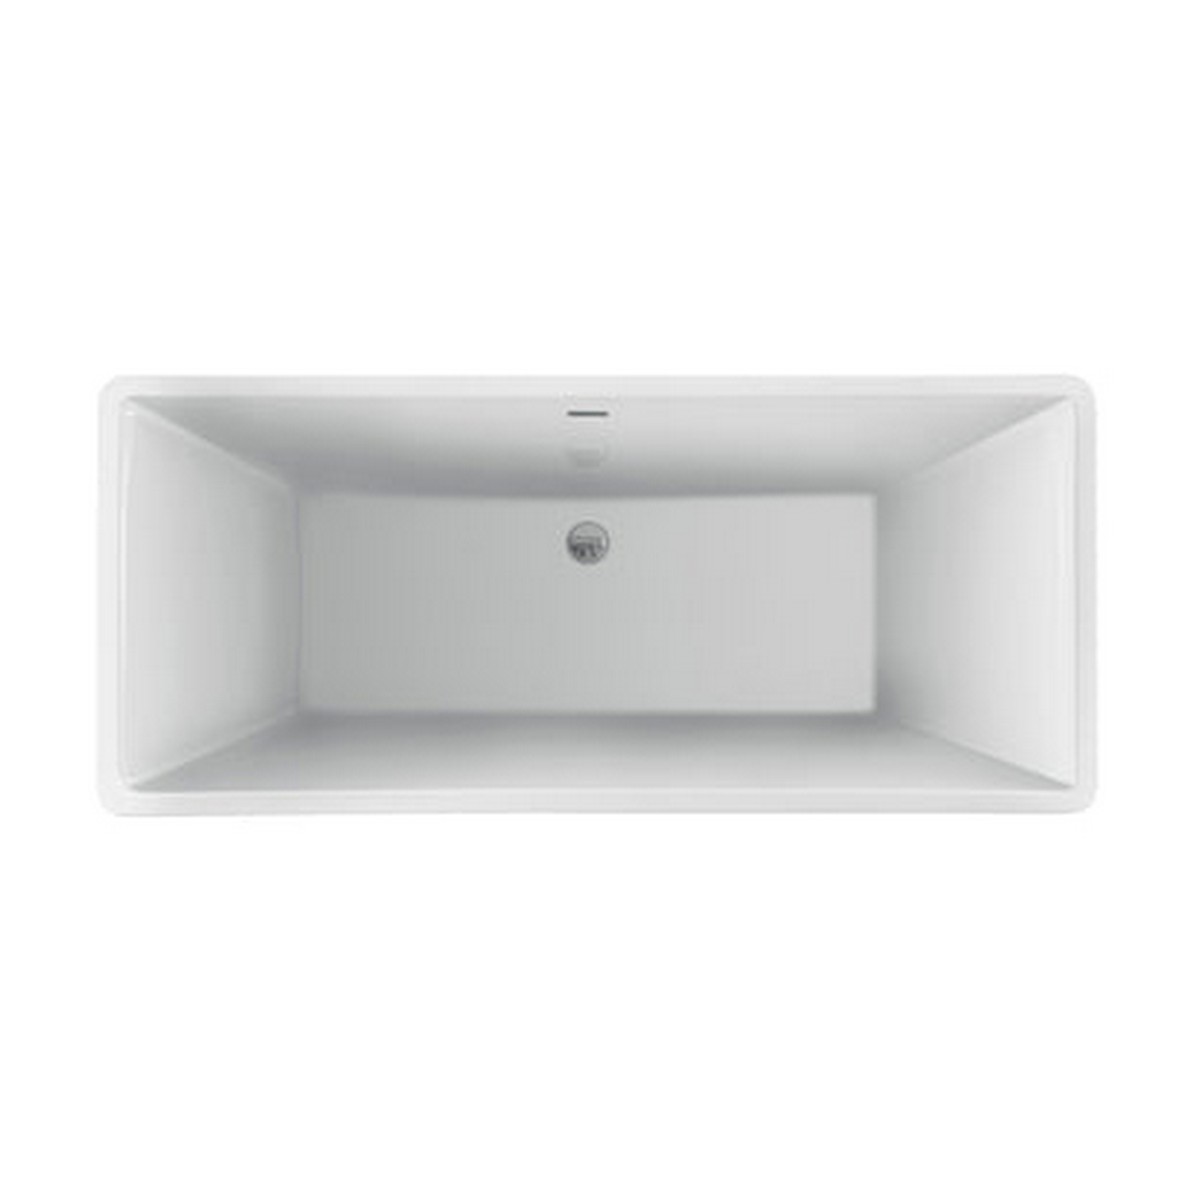 BARCLAY ATCRECN67FIG TAYLOR 66 1/4 INCH ACRYLIC FREESTANDING RECTANGULAR SOAKING BATHTUB IN WHITE WITH INTEGRAL DRAIN AND OVERFLOW